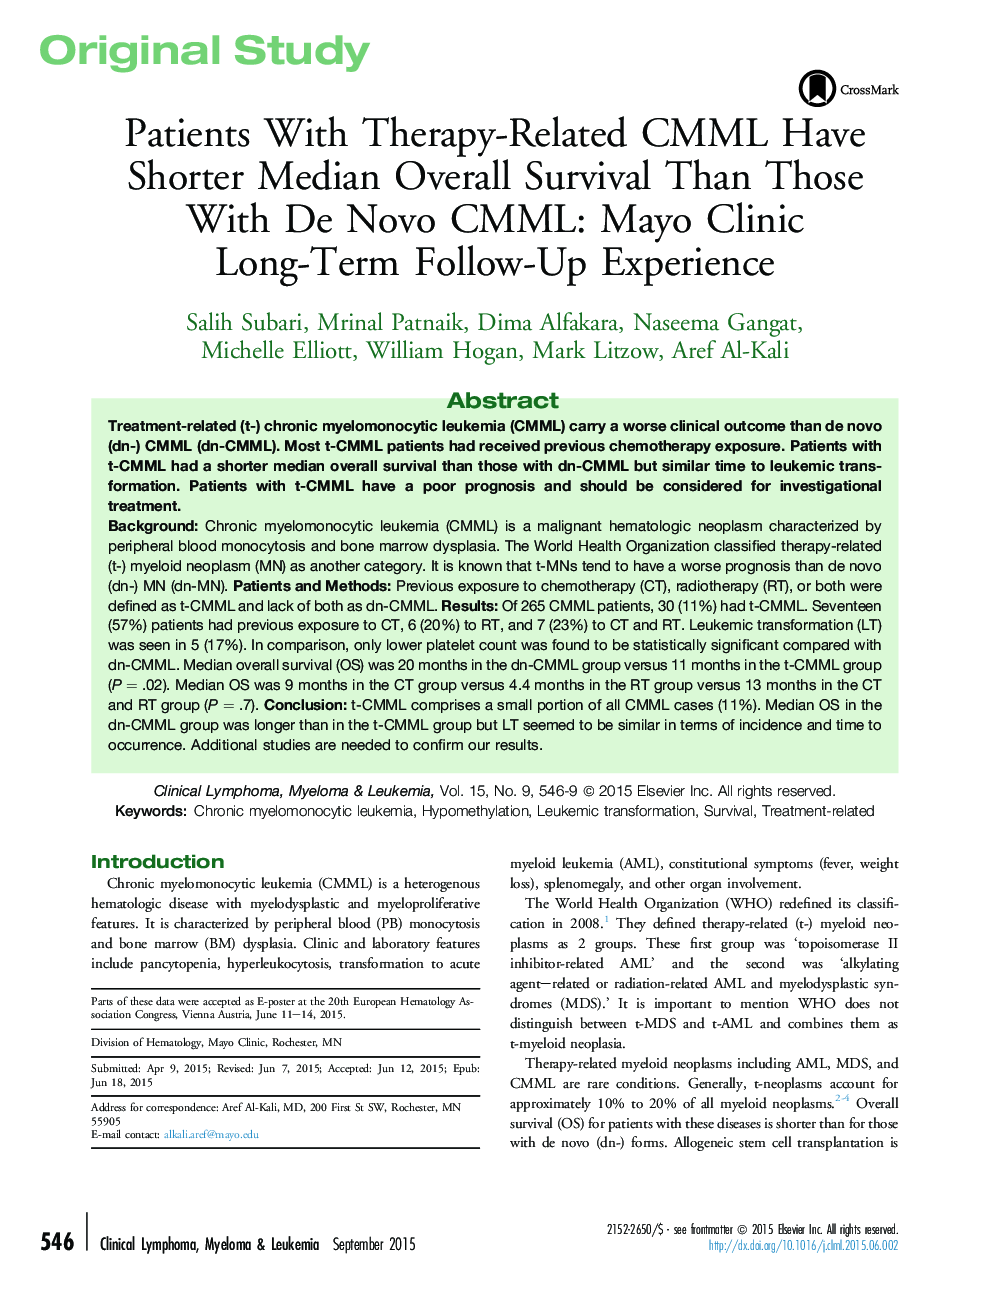 Patients With Therapy-Related CMML Have Shorter Median Overall Survival Than Those With De Novo CMML: Mayo Clinic Long-Term Follow-Up Experience 